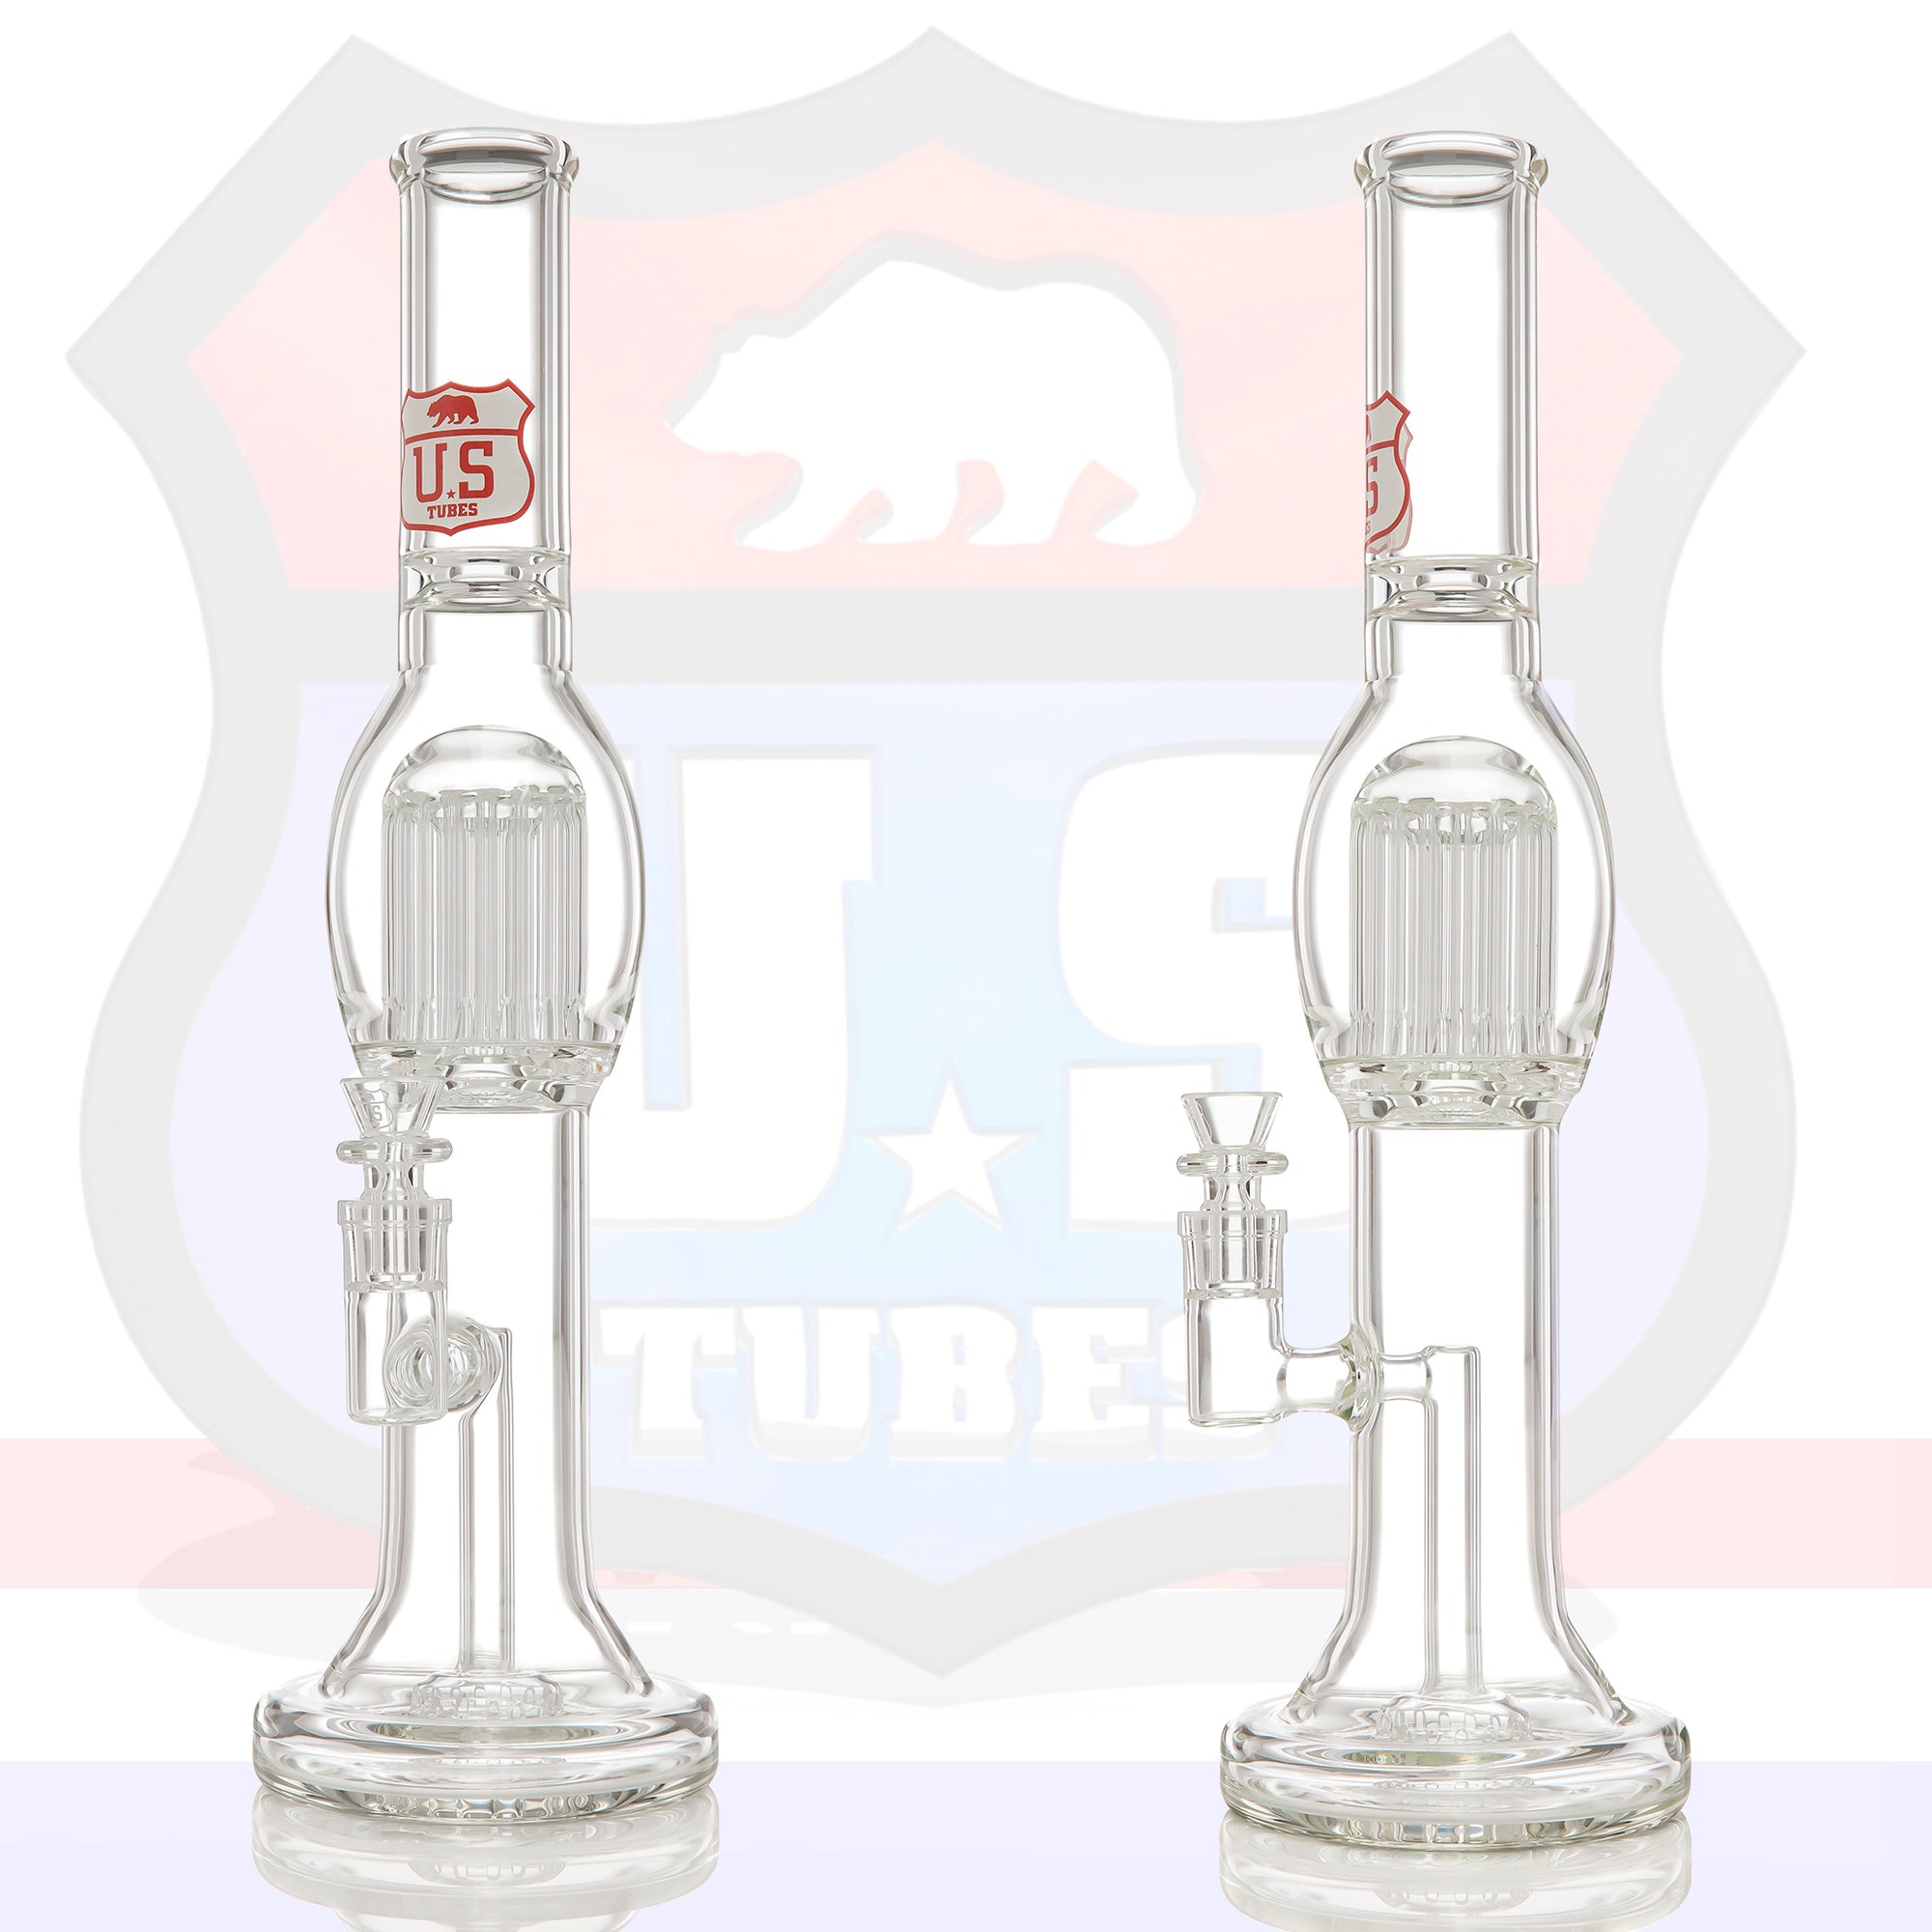 Hybrid Fixed Circ with 16 Arm Tree Perc Photo Edit showing two angles with US TUBES logo faintly behind the tubes